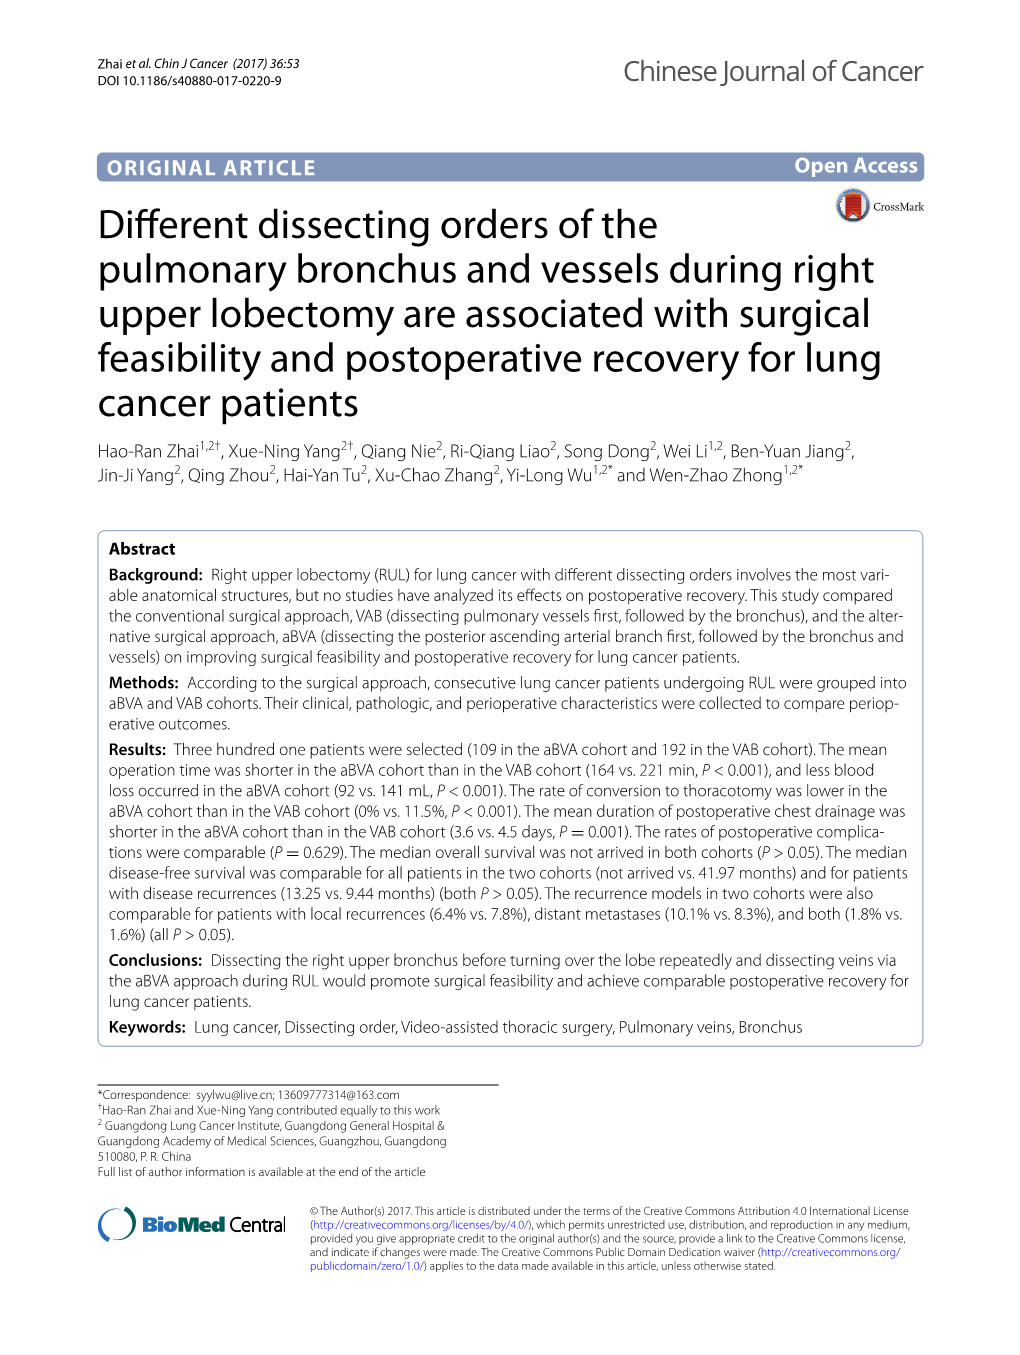 Different Dissecting Orders of the Pulmonary Bronchus and Vessels